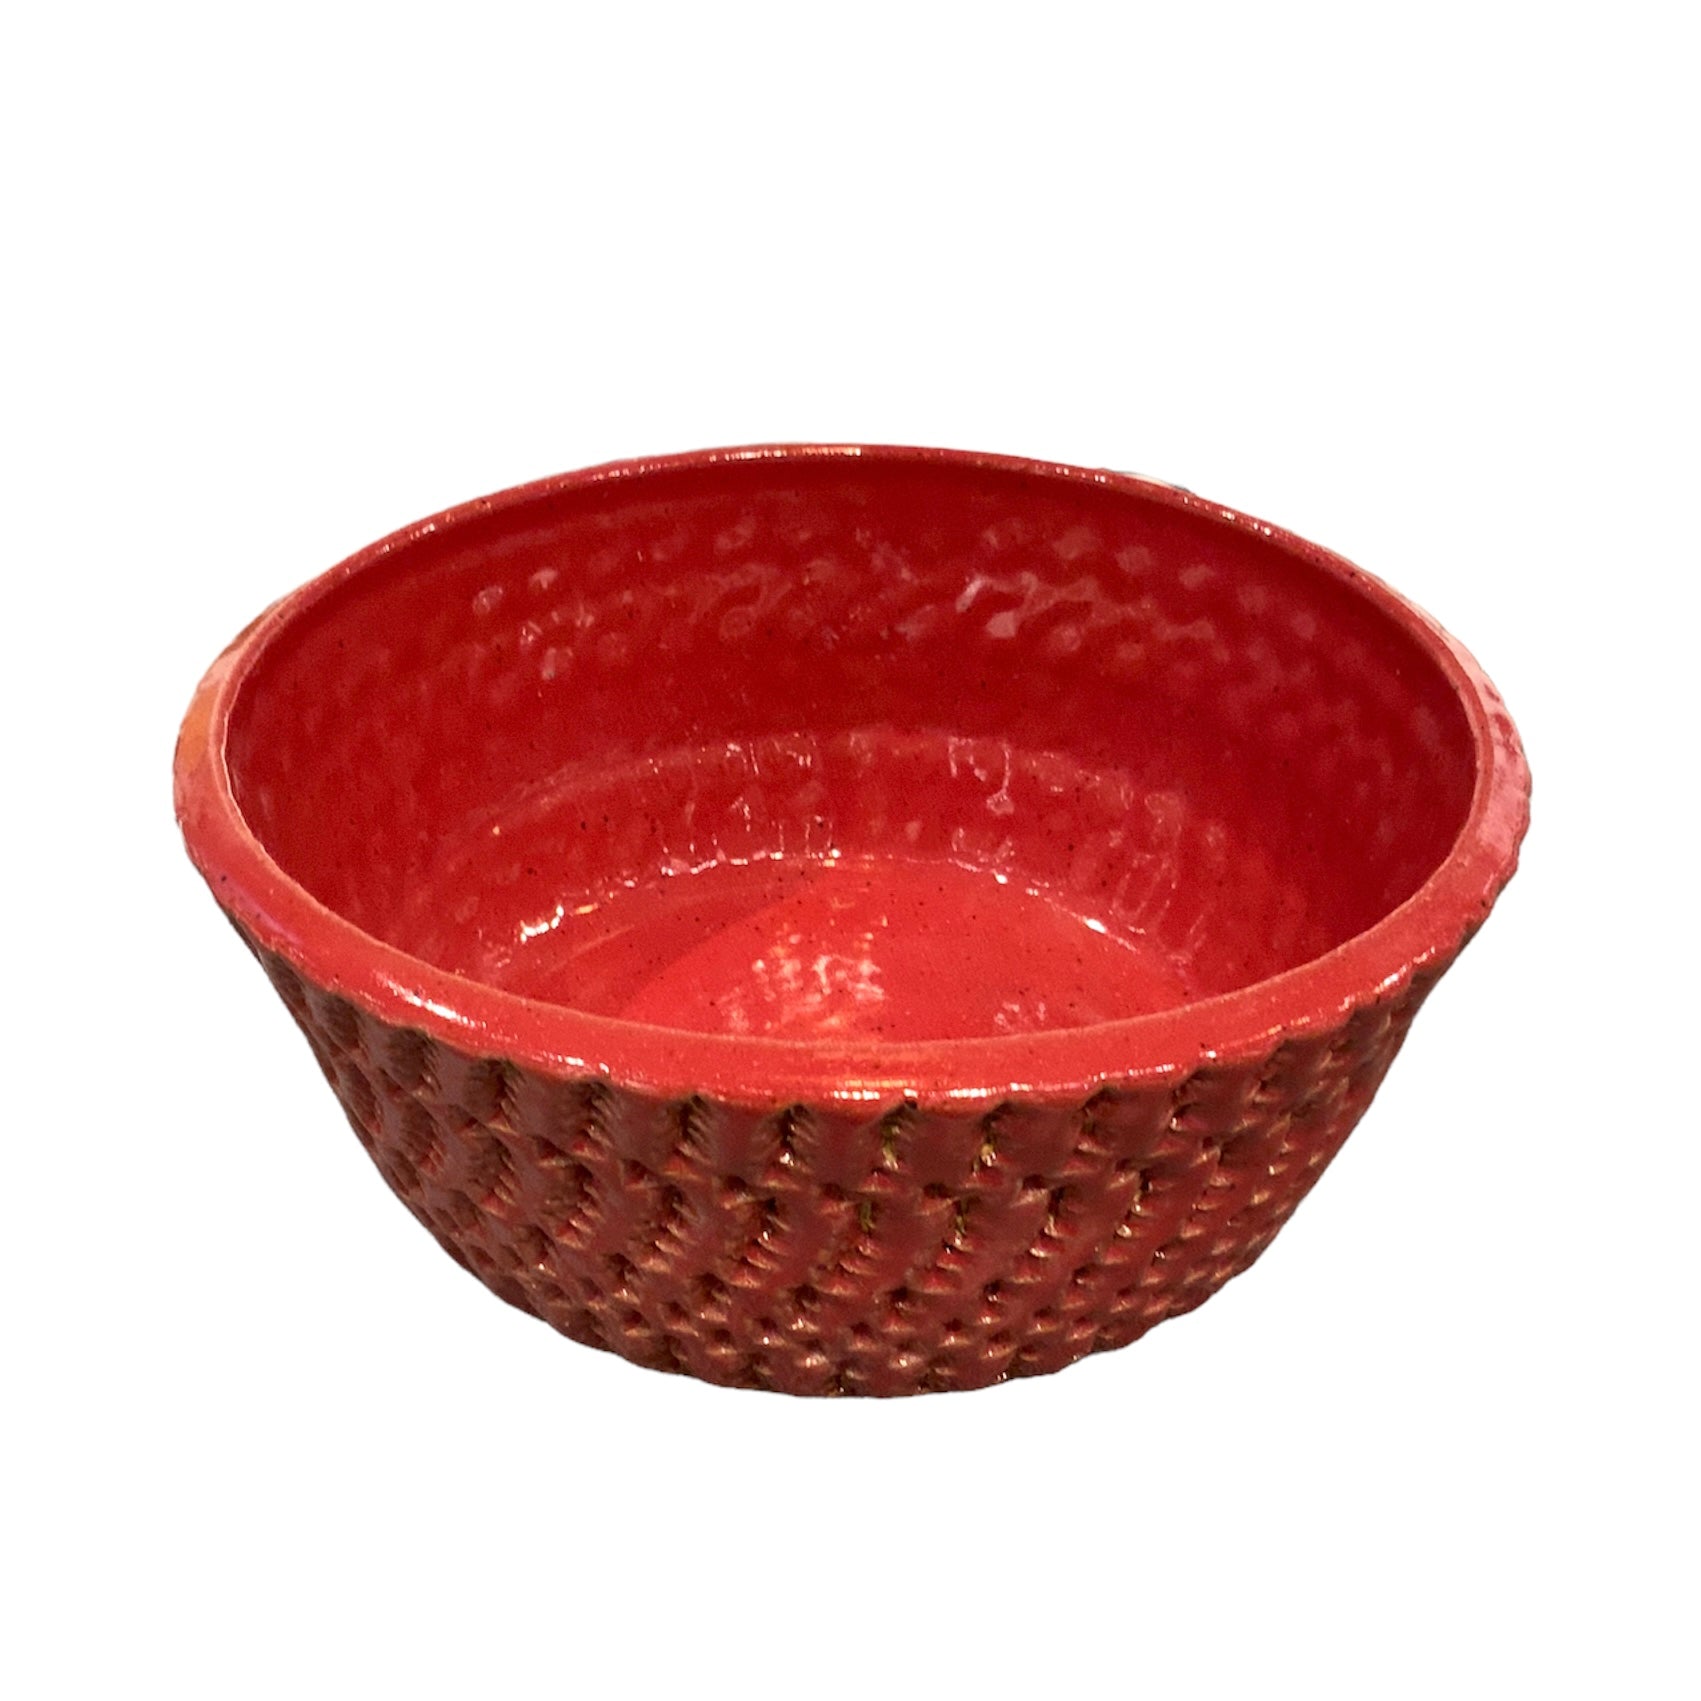 TEXTURED BOWL - SPECKLED RED